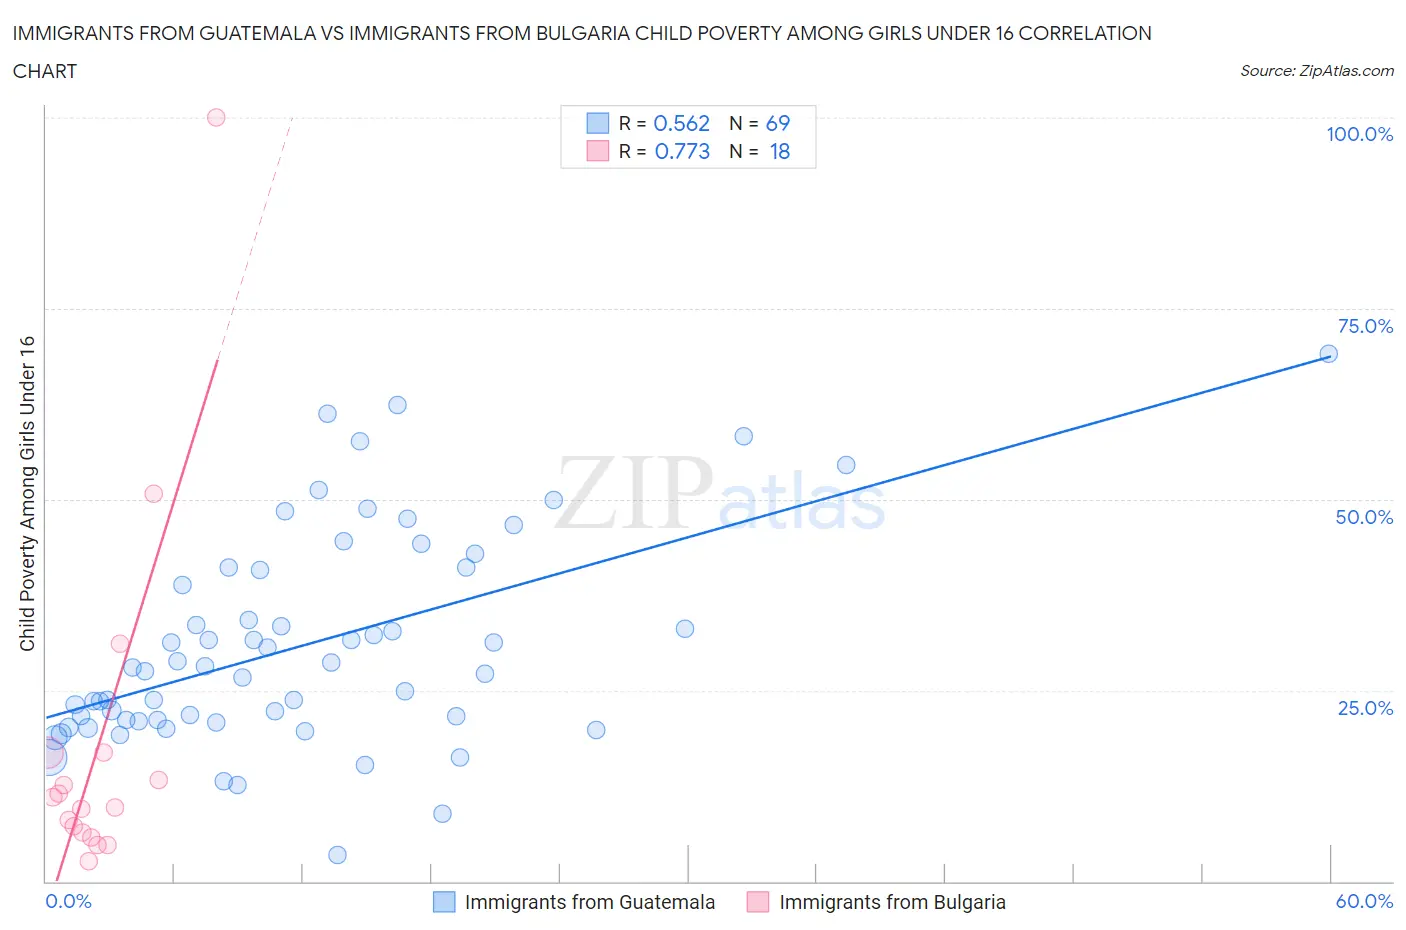 Immigrants from Guatemala vs Immigrants from Bulgaria Child Poverty Among Girls Under 16